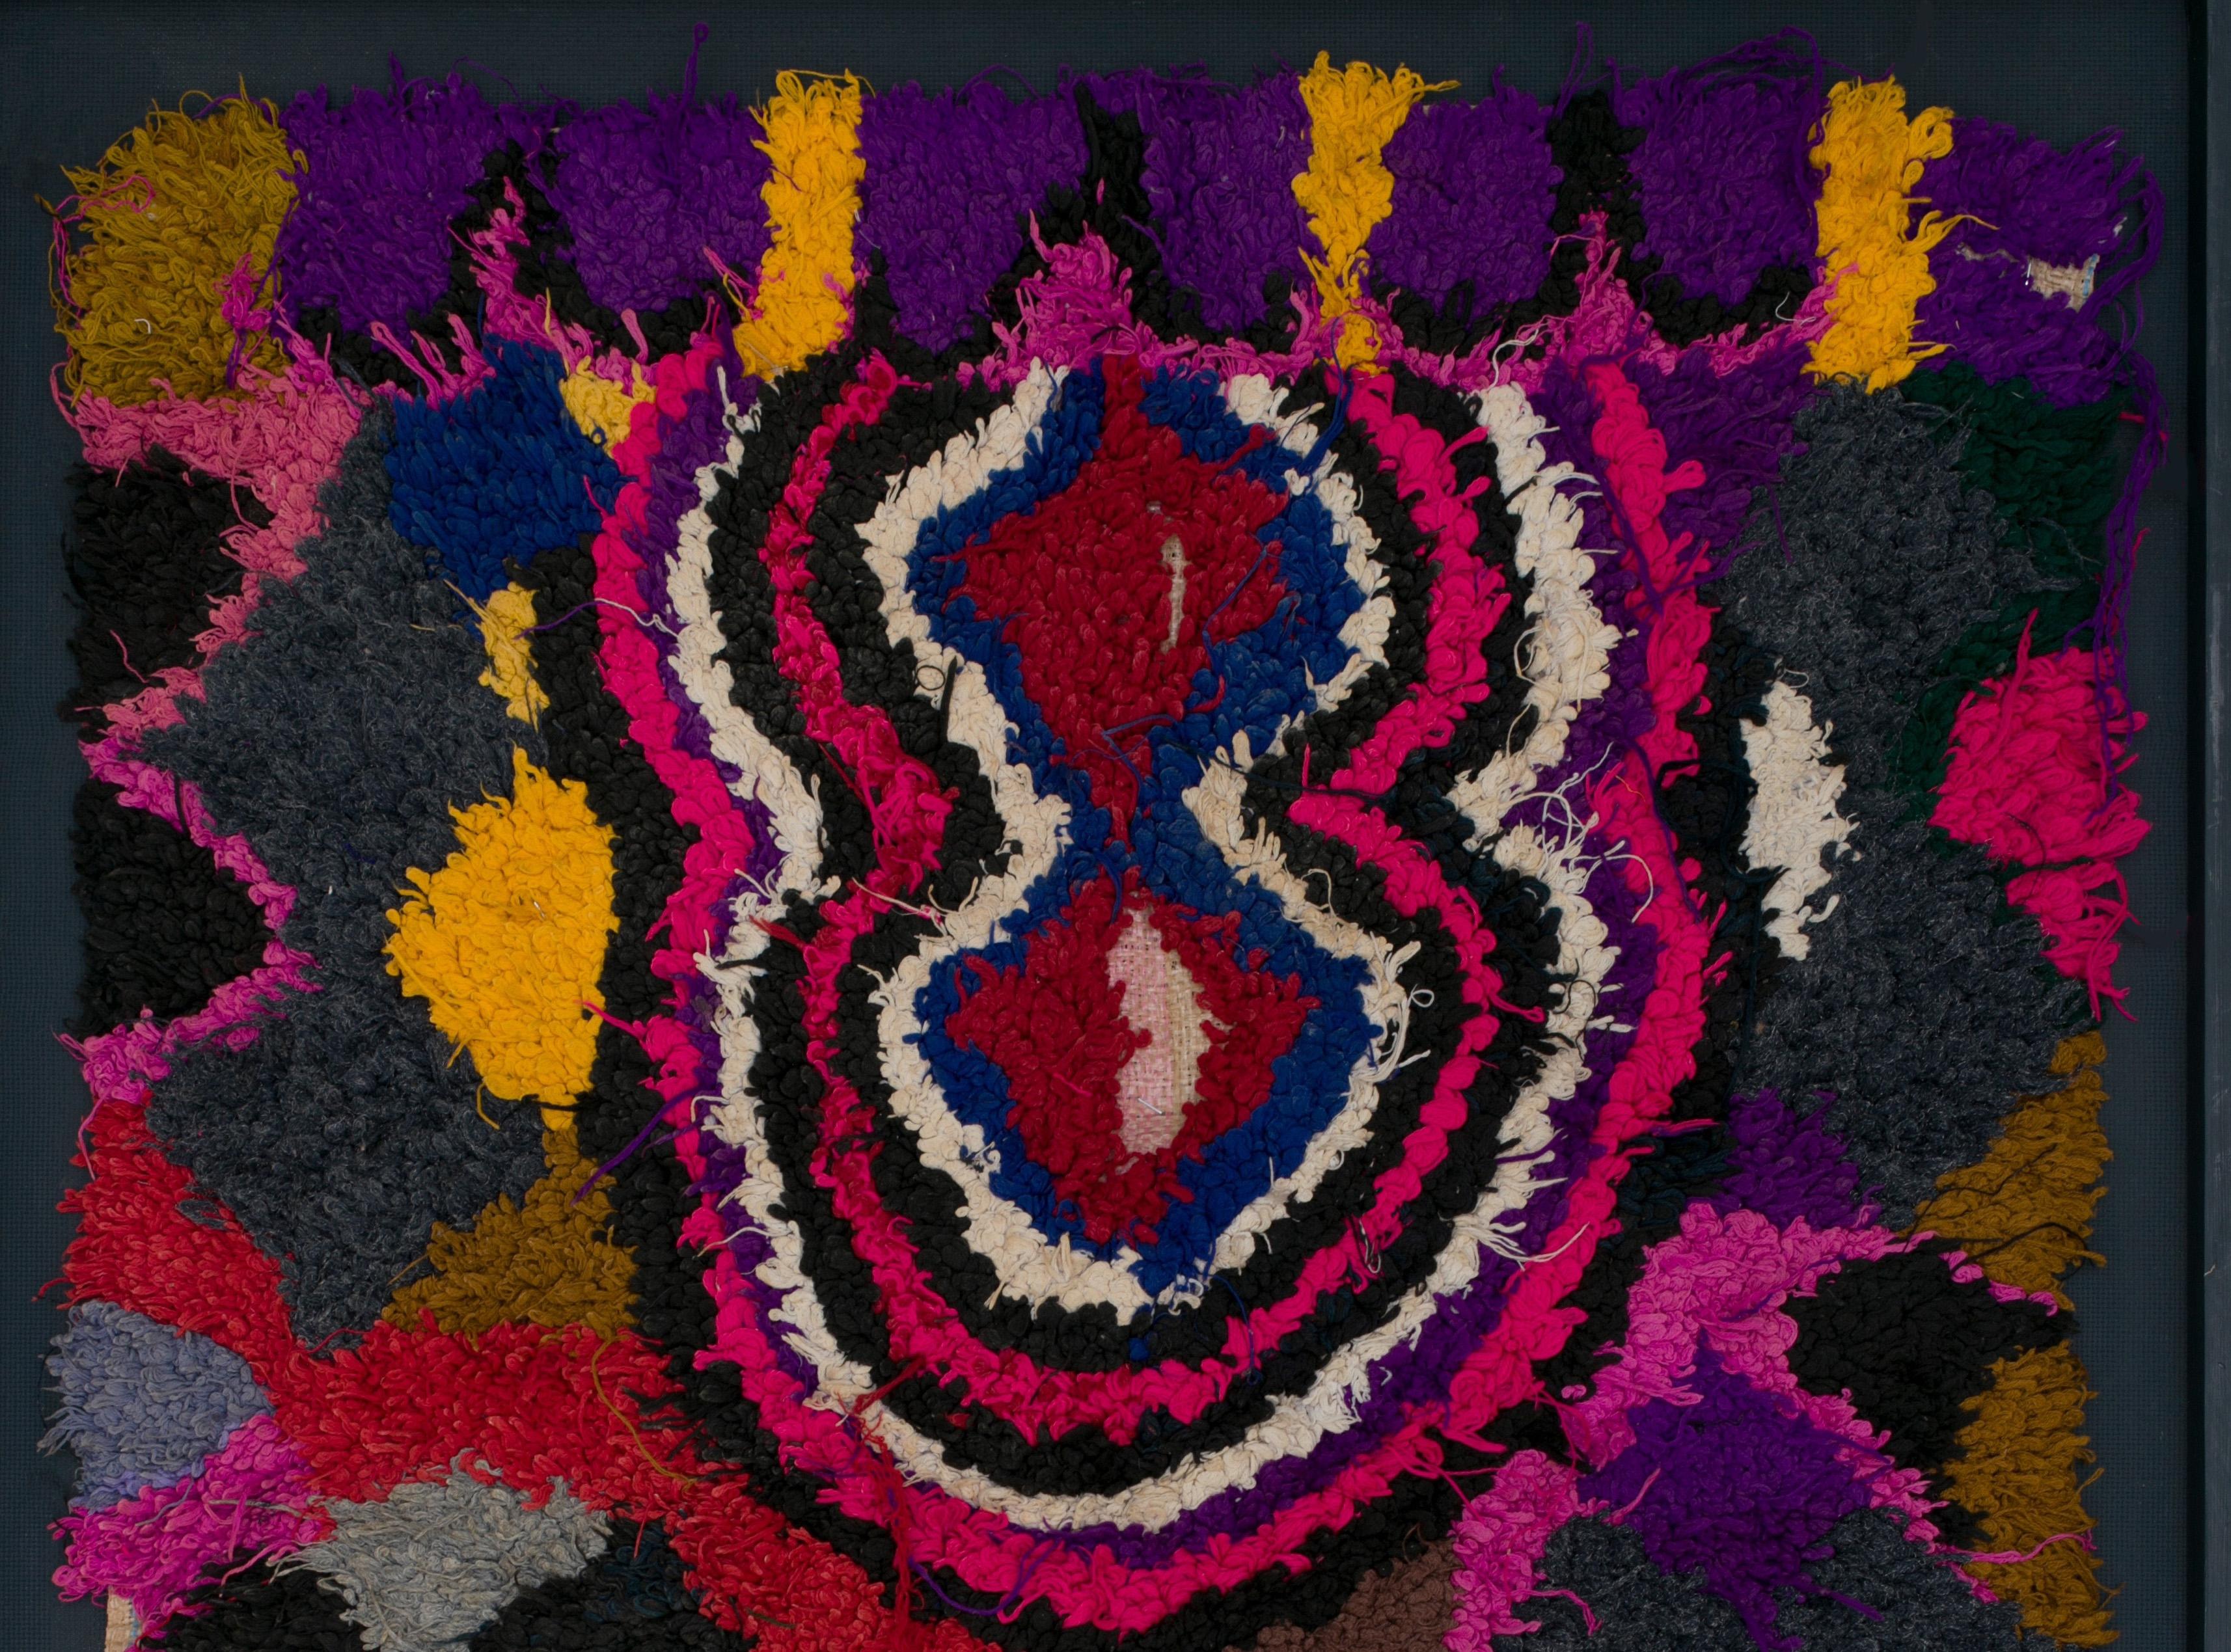 Rectangular format for this vintage tapestry made by Berber women from the Atlas Mountains.
Made from woollen ends and other threads, embroidered on wasted plastic bags of cereals, this unique and vintage work is the demonstration of the Secret